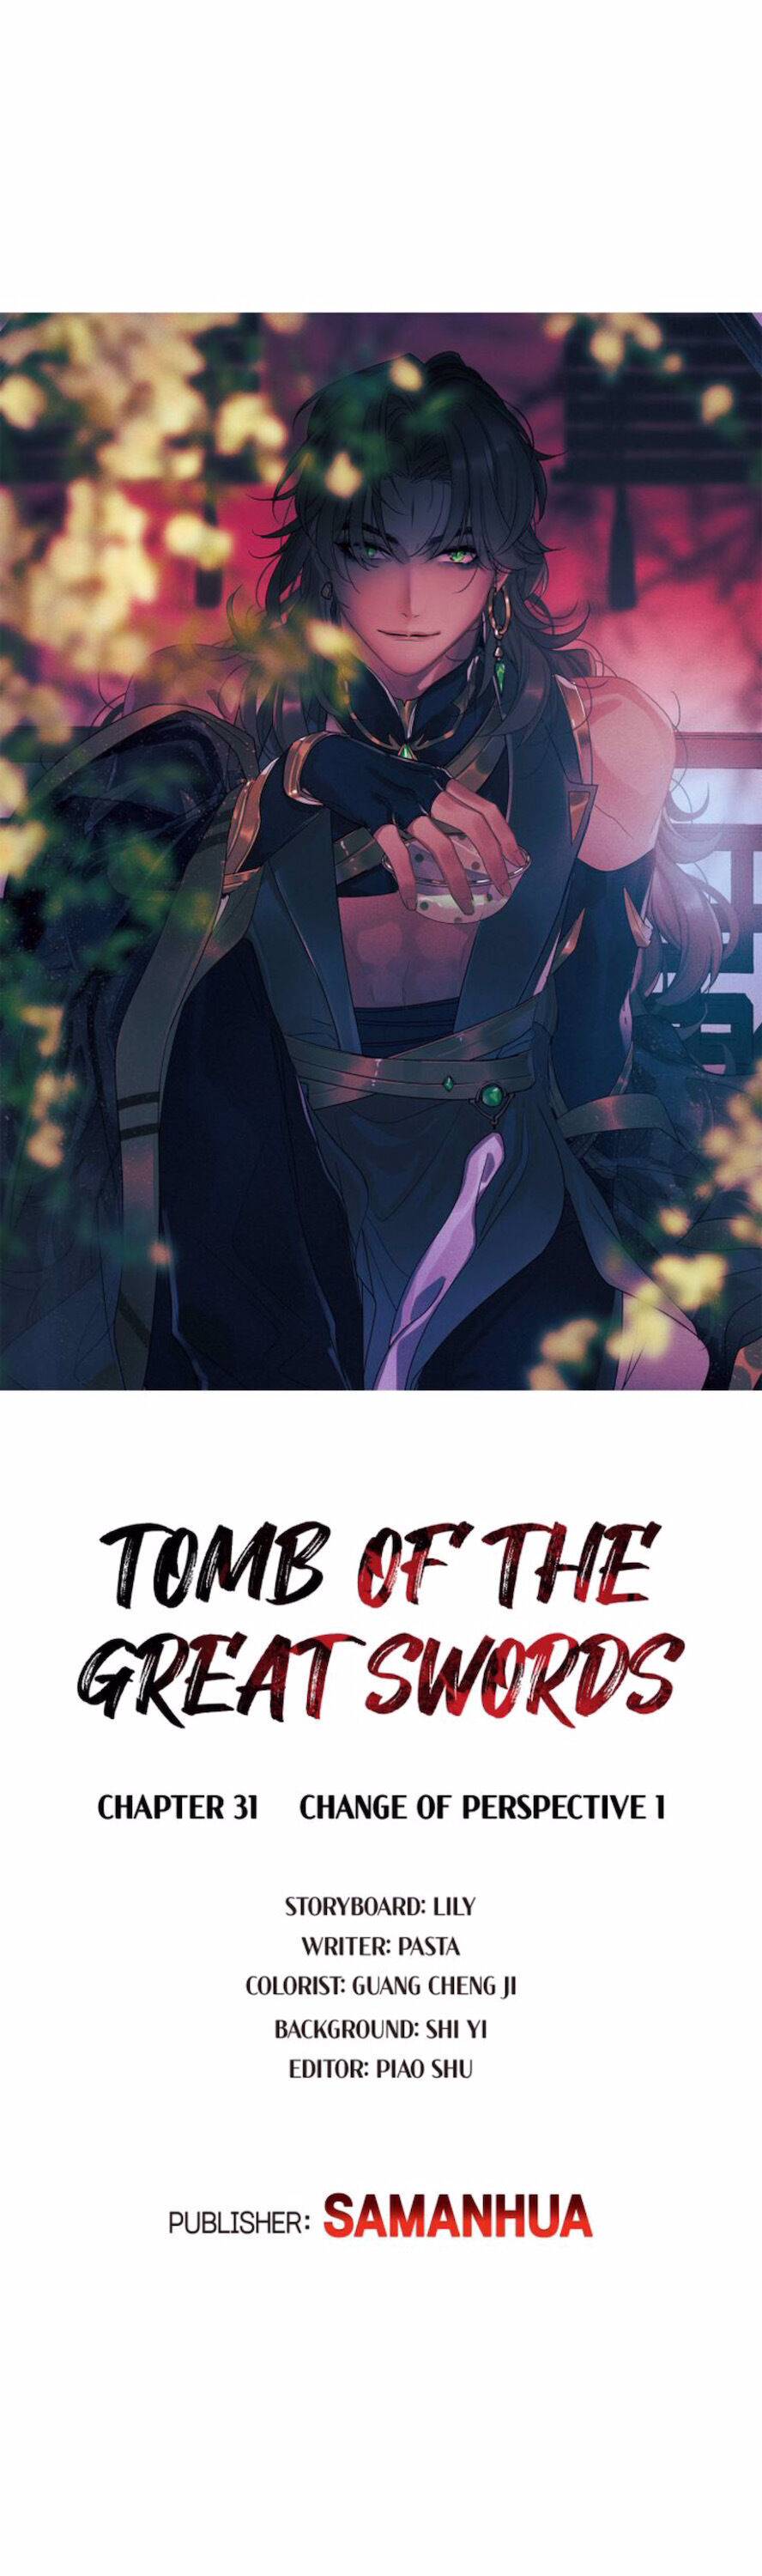 Tomb of the Great Swords Chapter 31